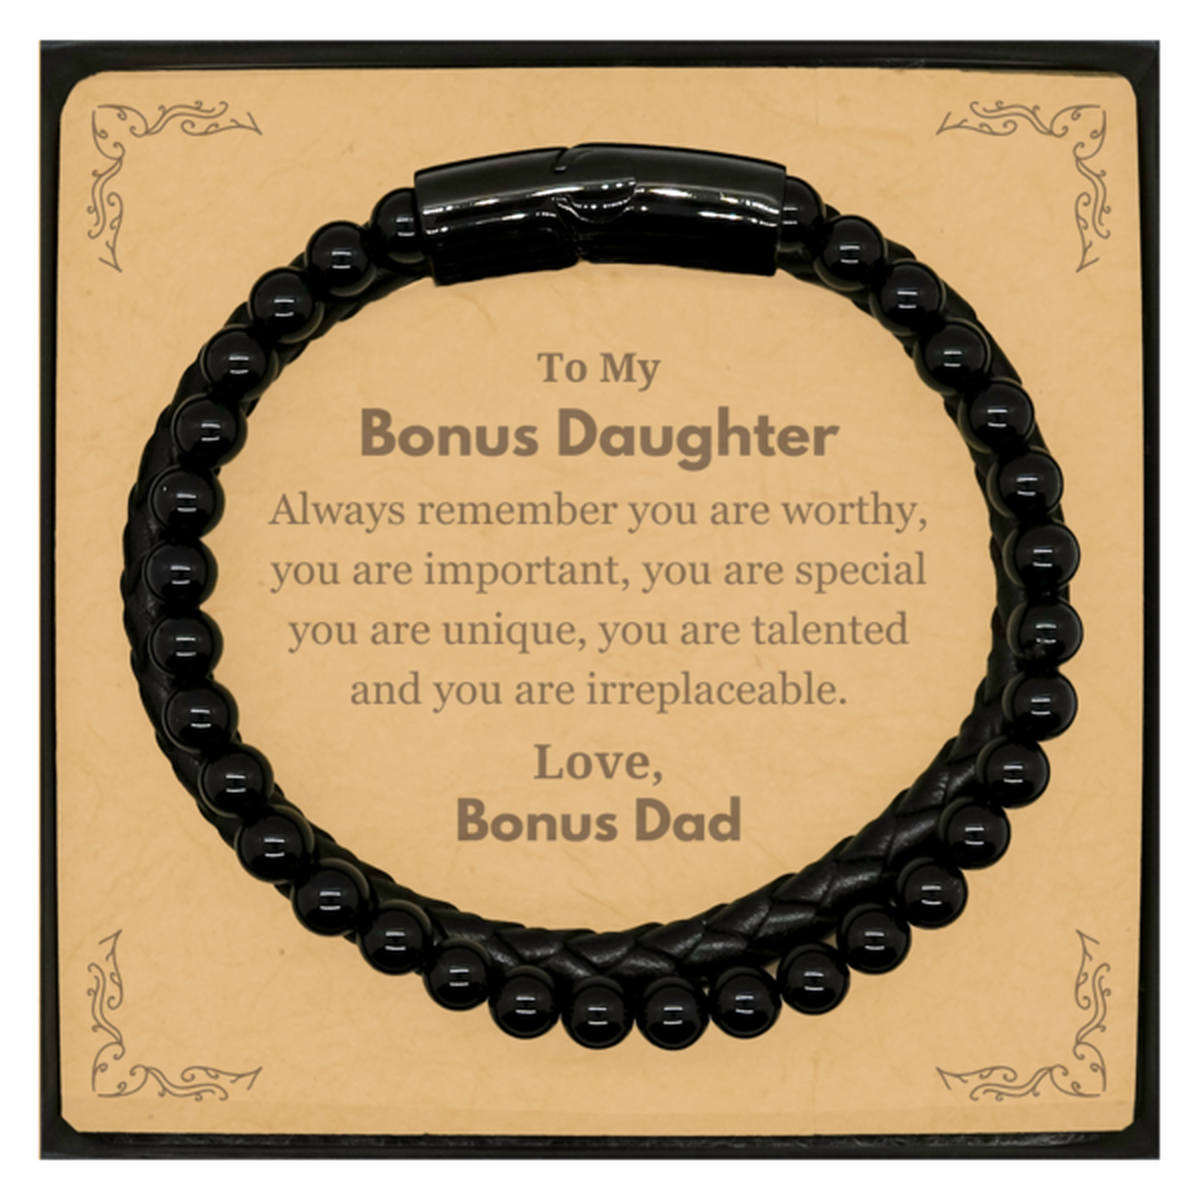 Bonus Daughter Birthday Gifts from Bonus Dad, Inspirational Stone Leather Bracelets for Bonus Daughter Christmas Graduation Gifts for Bonus Daughter Always remember you are worthy, you are important. Love, Bonus Dad